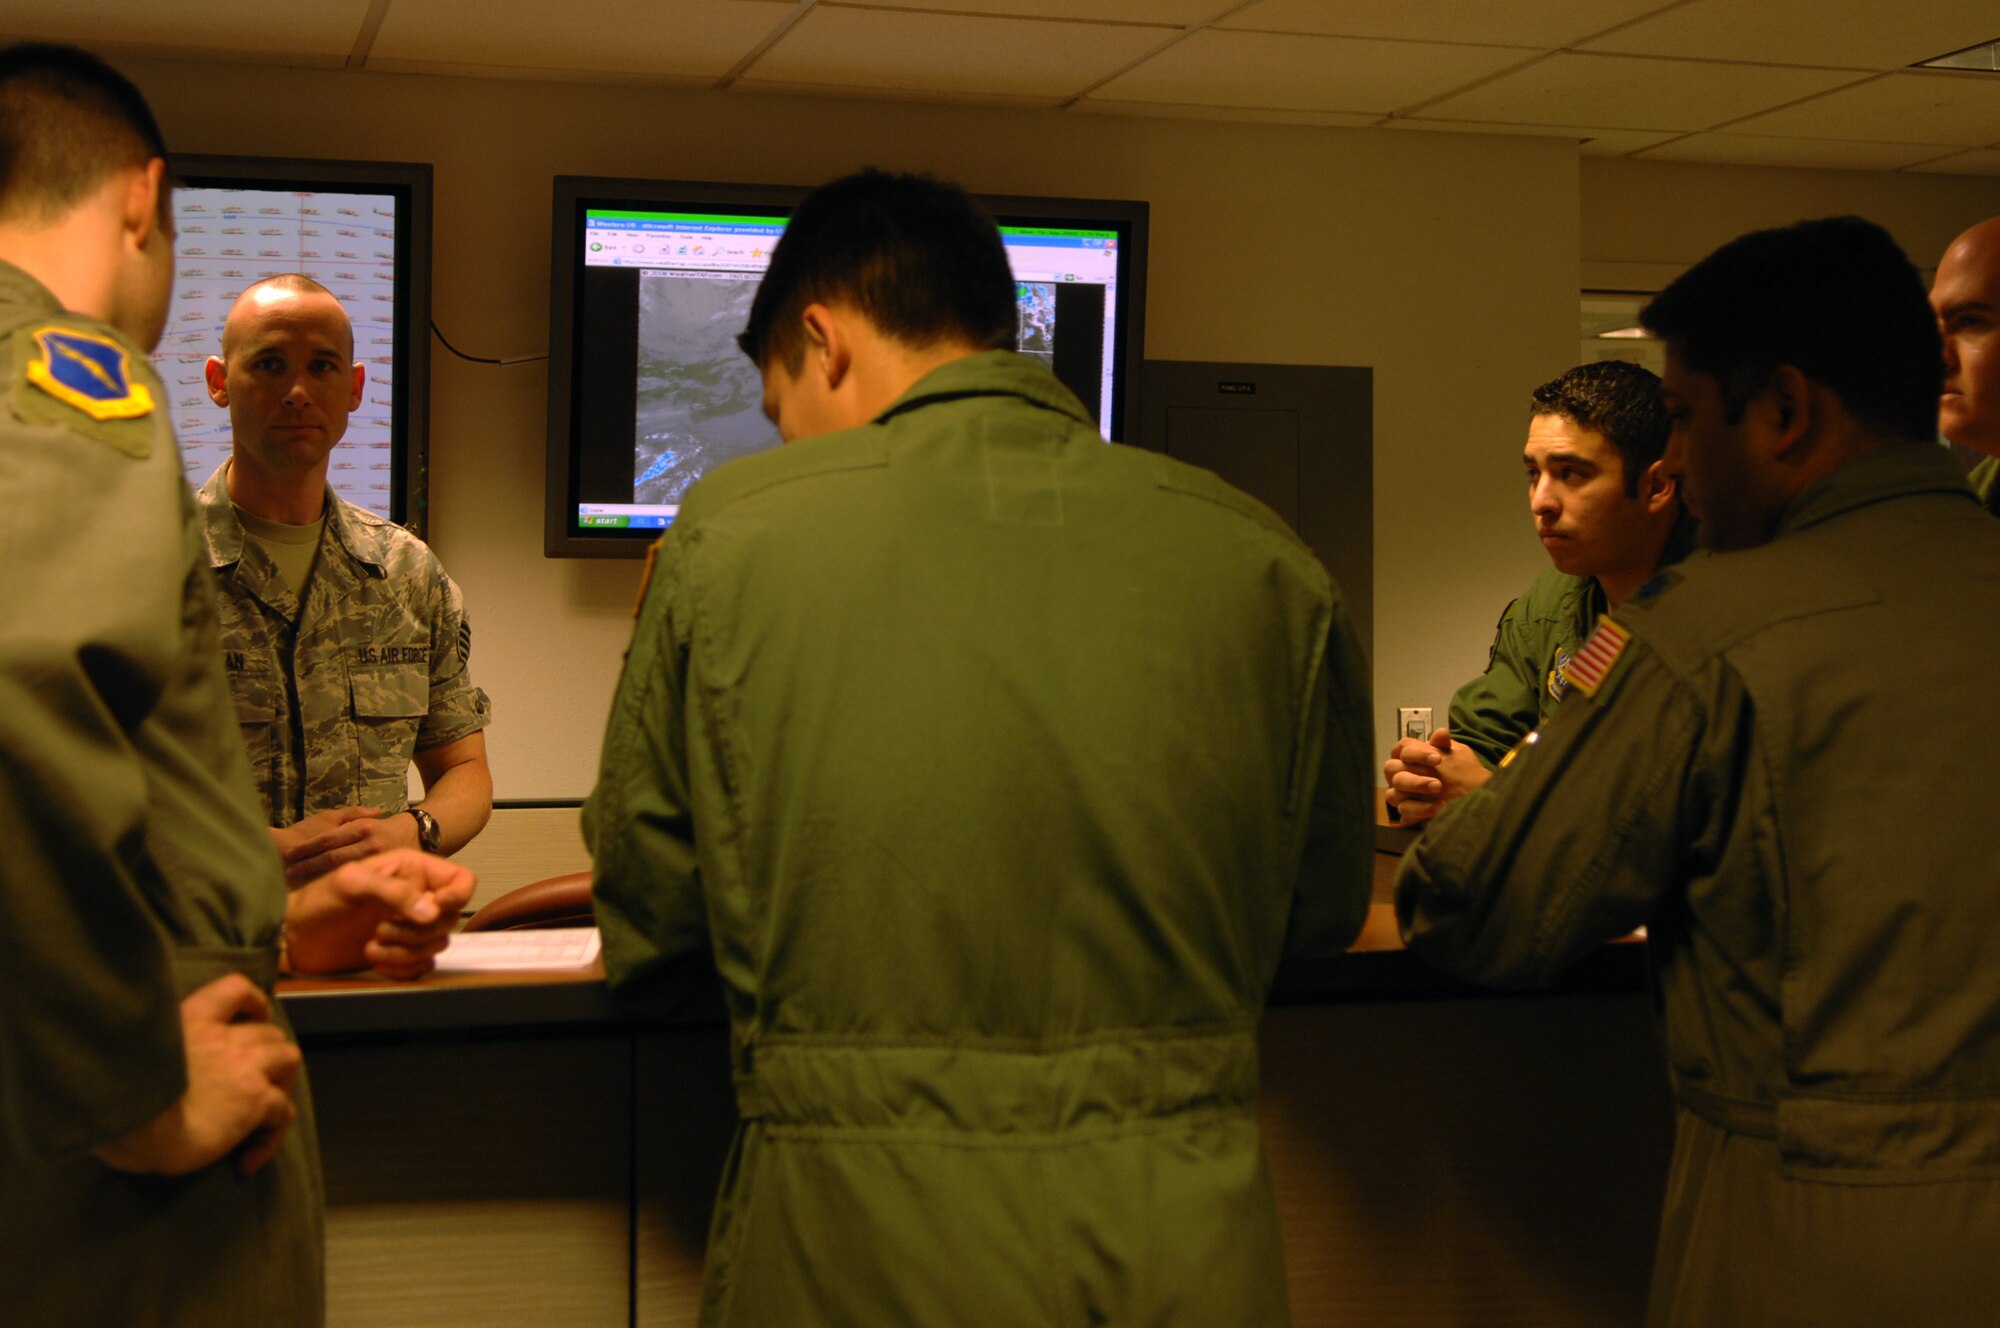 FAIRCHILD AIR FORCE BASE, Wash. – Staff Sgt. Bradley Boatman, 92nd Operations Support Squadron weather observer/forecaster briefs the weather to an air crew preparing for a mission here June 16. (U.S. Air Force photo / Senior Airman Jocelyn A. Ford)